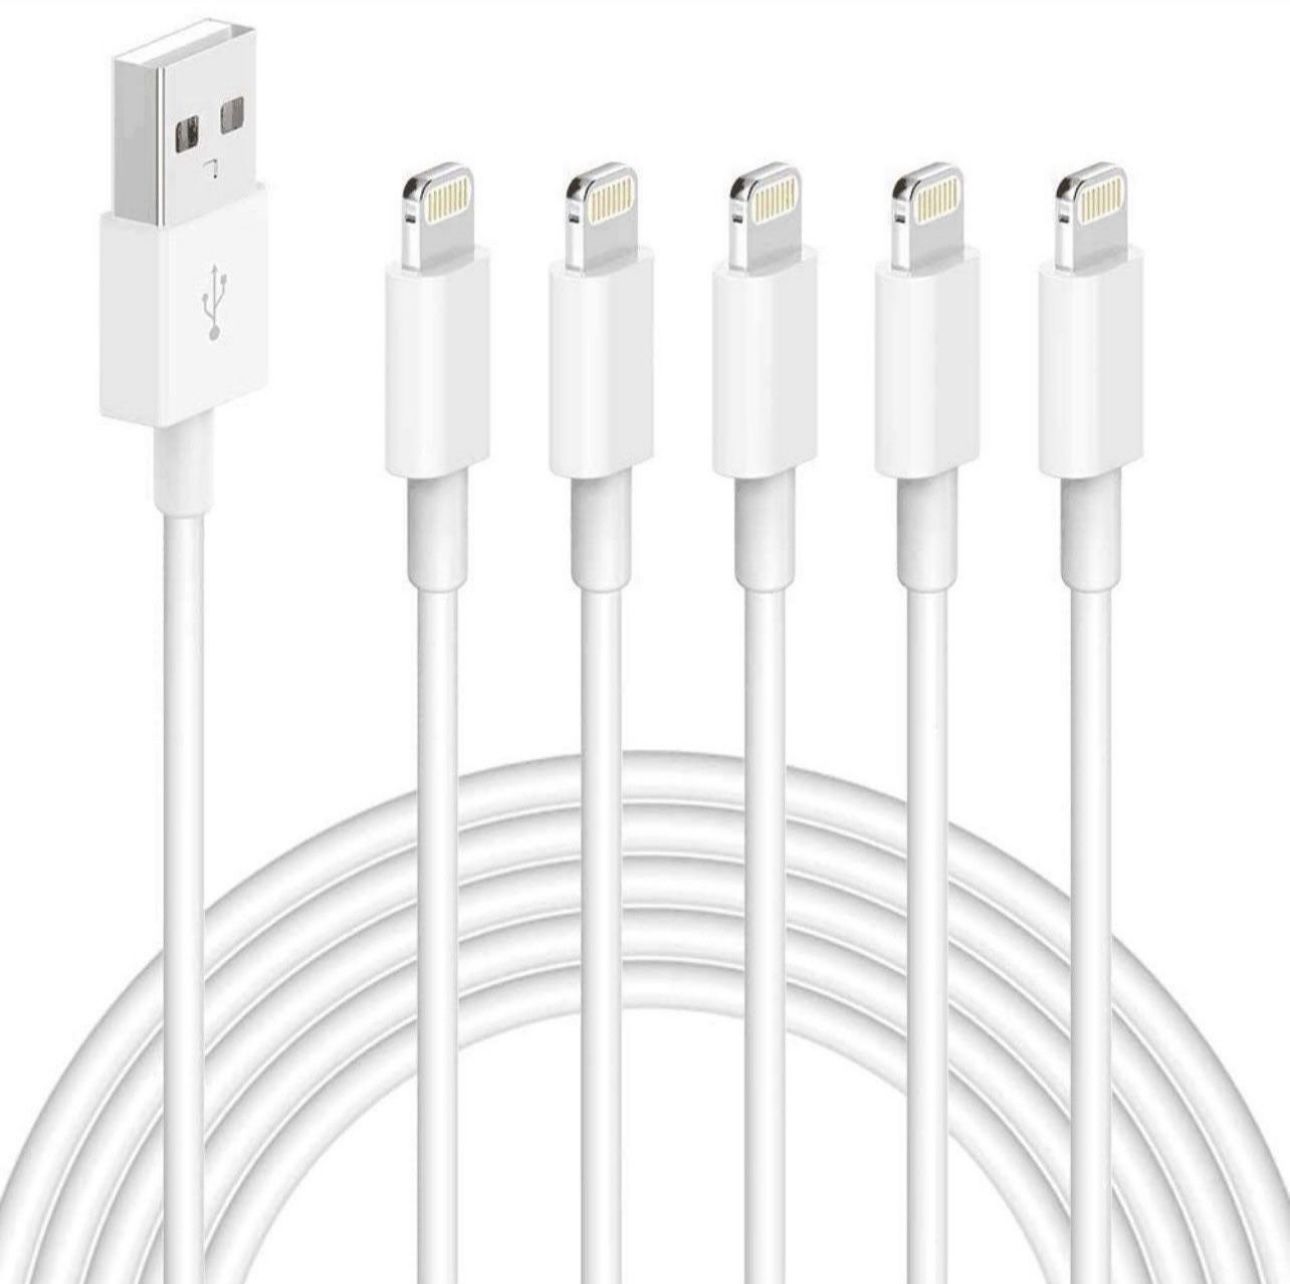 iPhone Charger,5 Pack (10 FT) VODRAIS [Apple MFi Certified] Charger Lightning to USB Cable Compatible iPhone 13/12/11 Pro/11/XS MAX/XR/8/7/6s plus,iPa